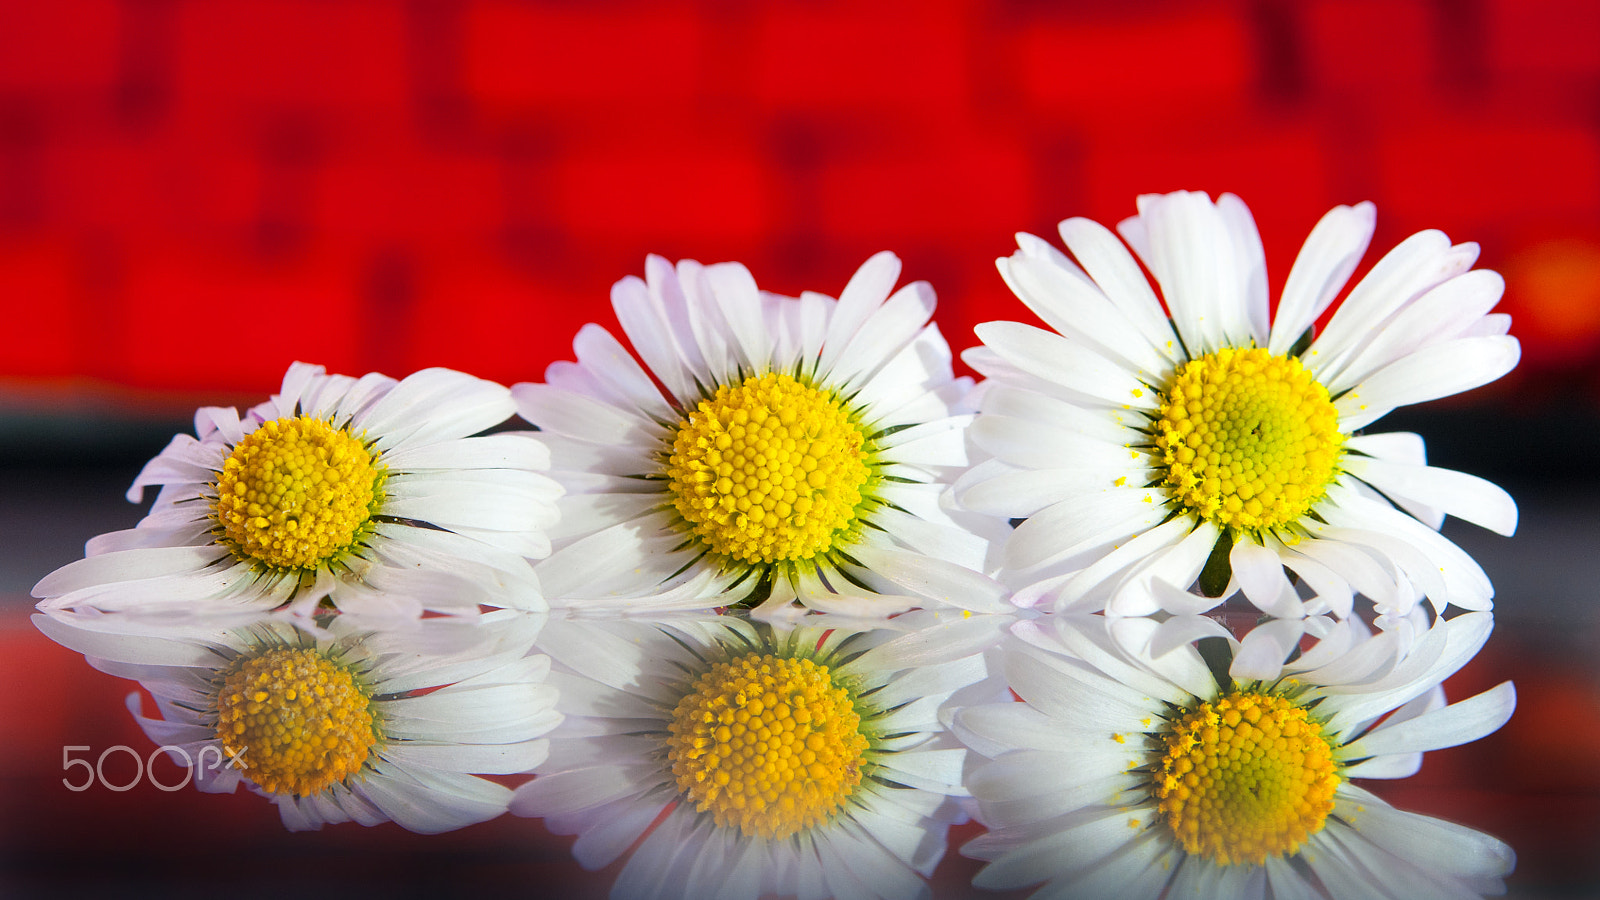 Nikon D300 sample photo. Reflection of daisies-red photography